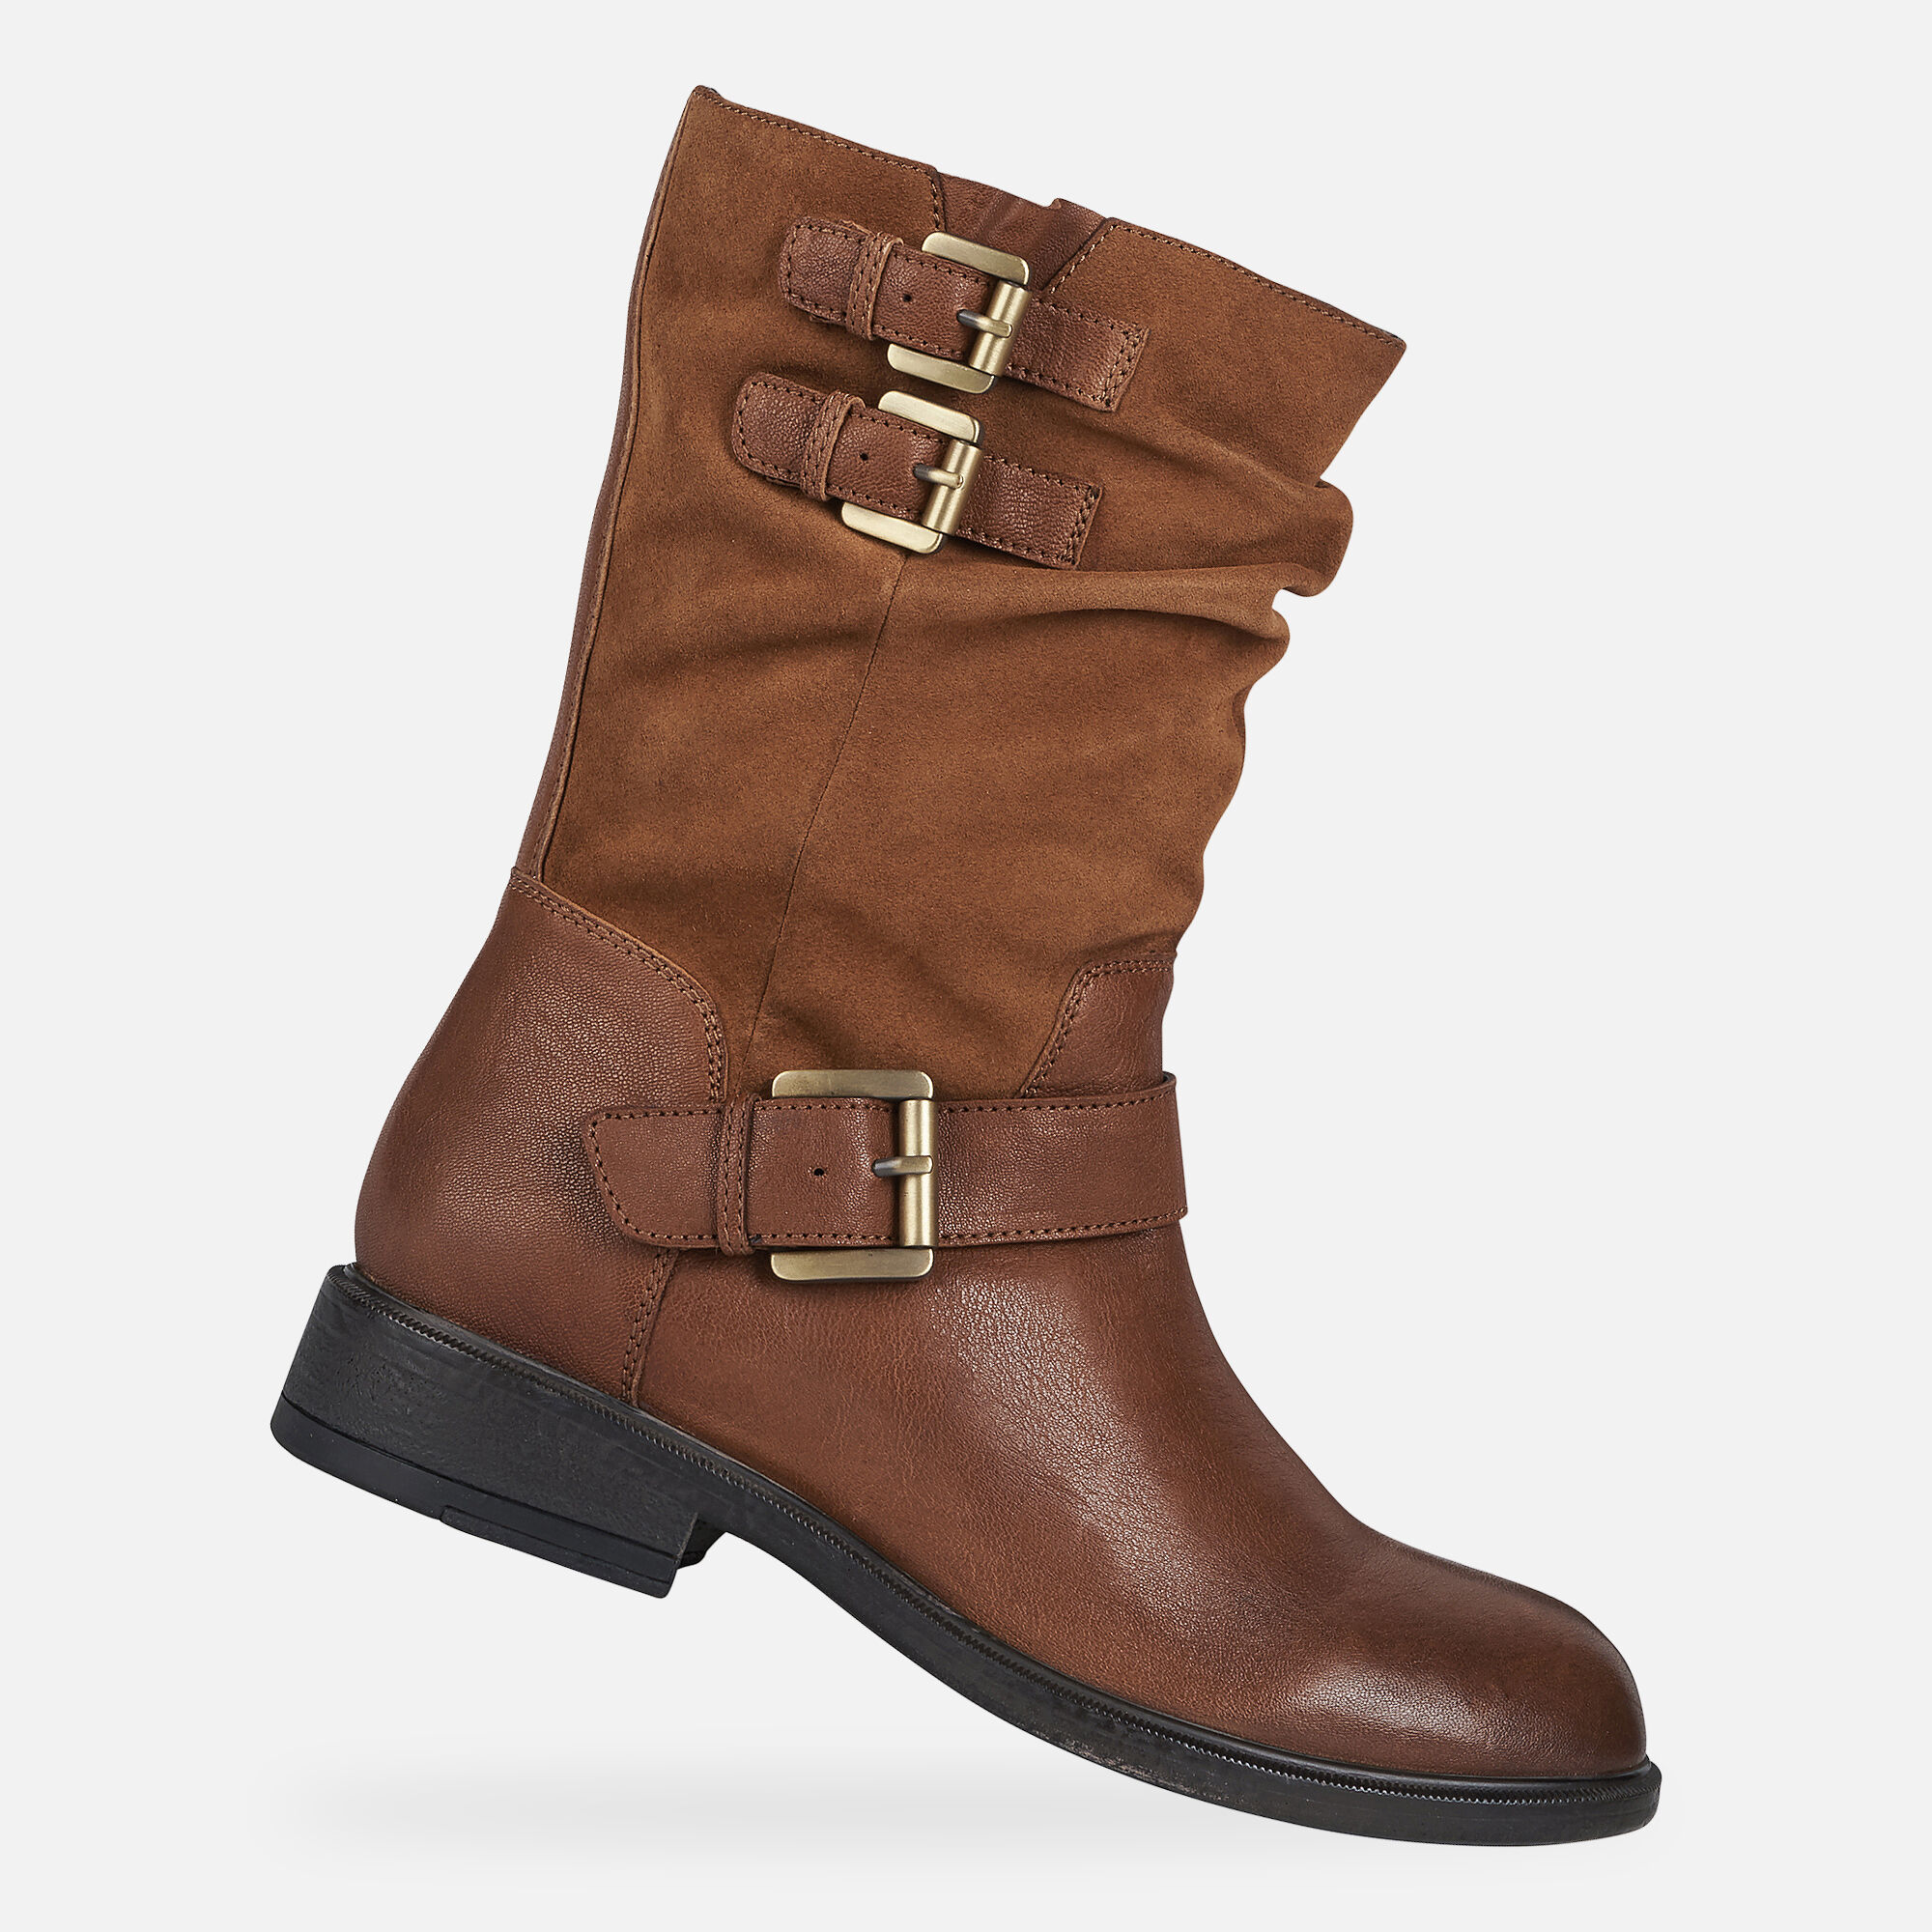 Geox CATRIA Woman: Cognac Ankle Boots 